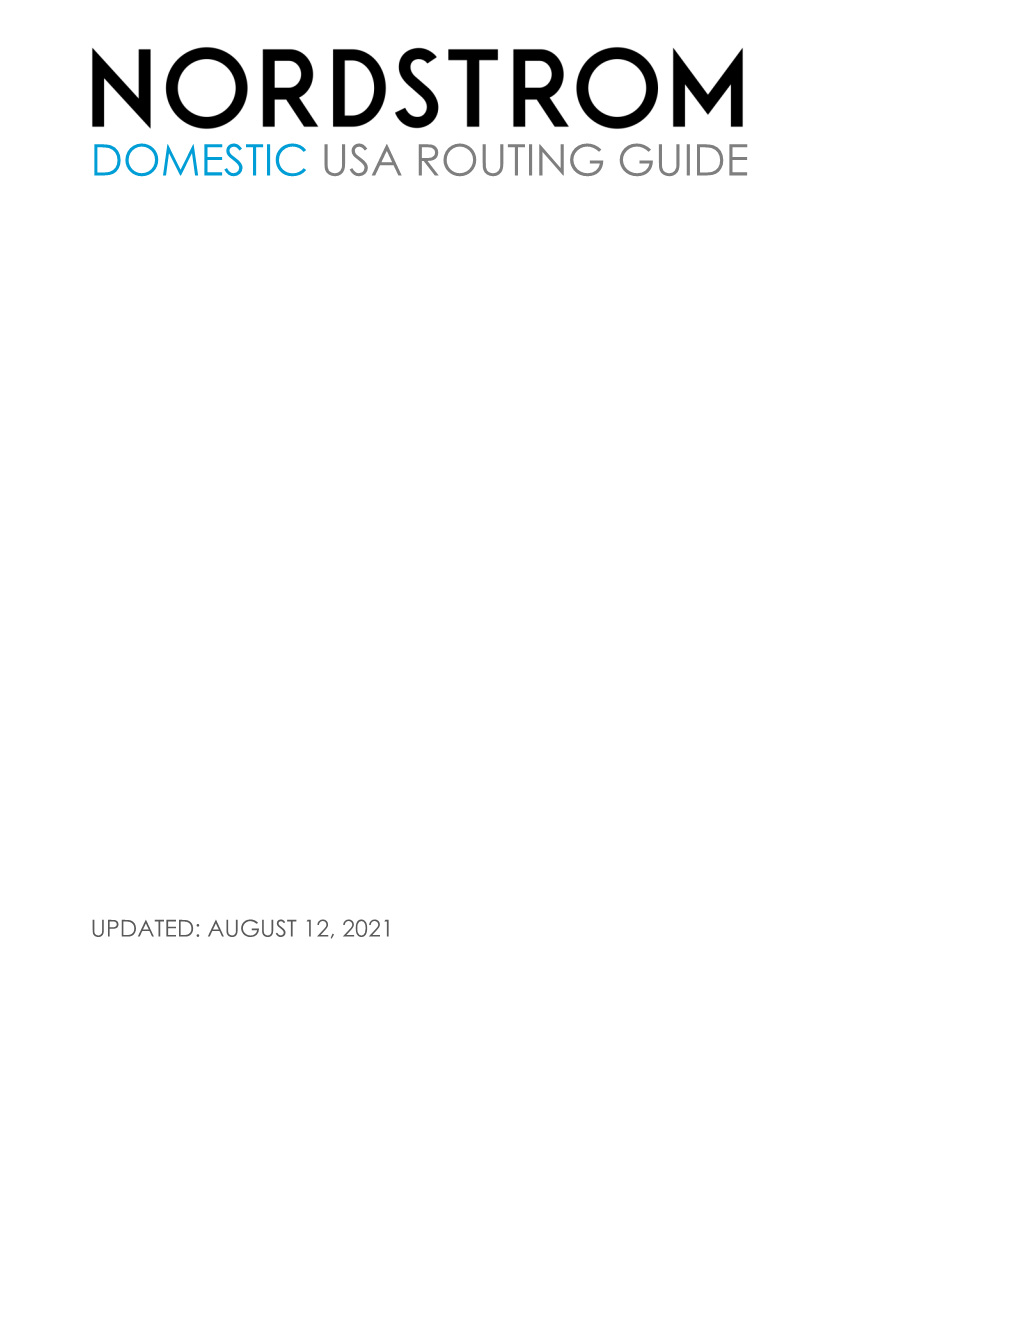 Domestic Usa Routing Guide